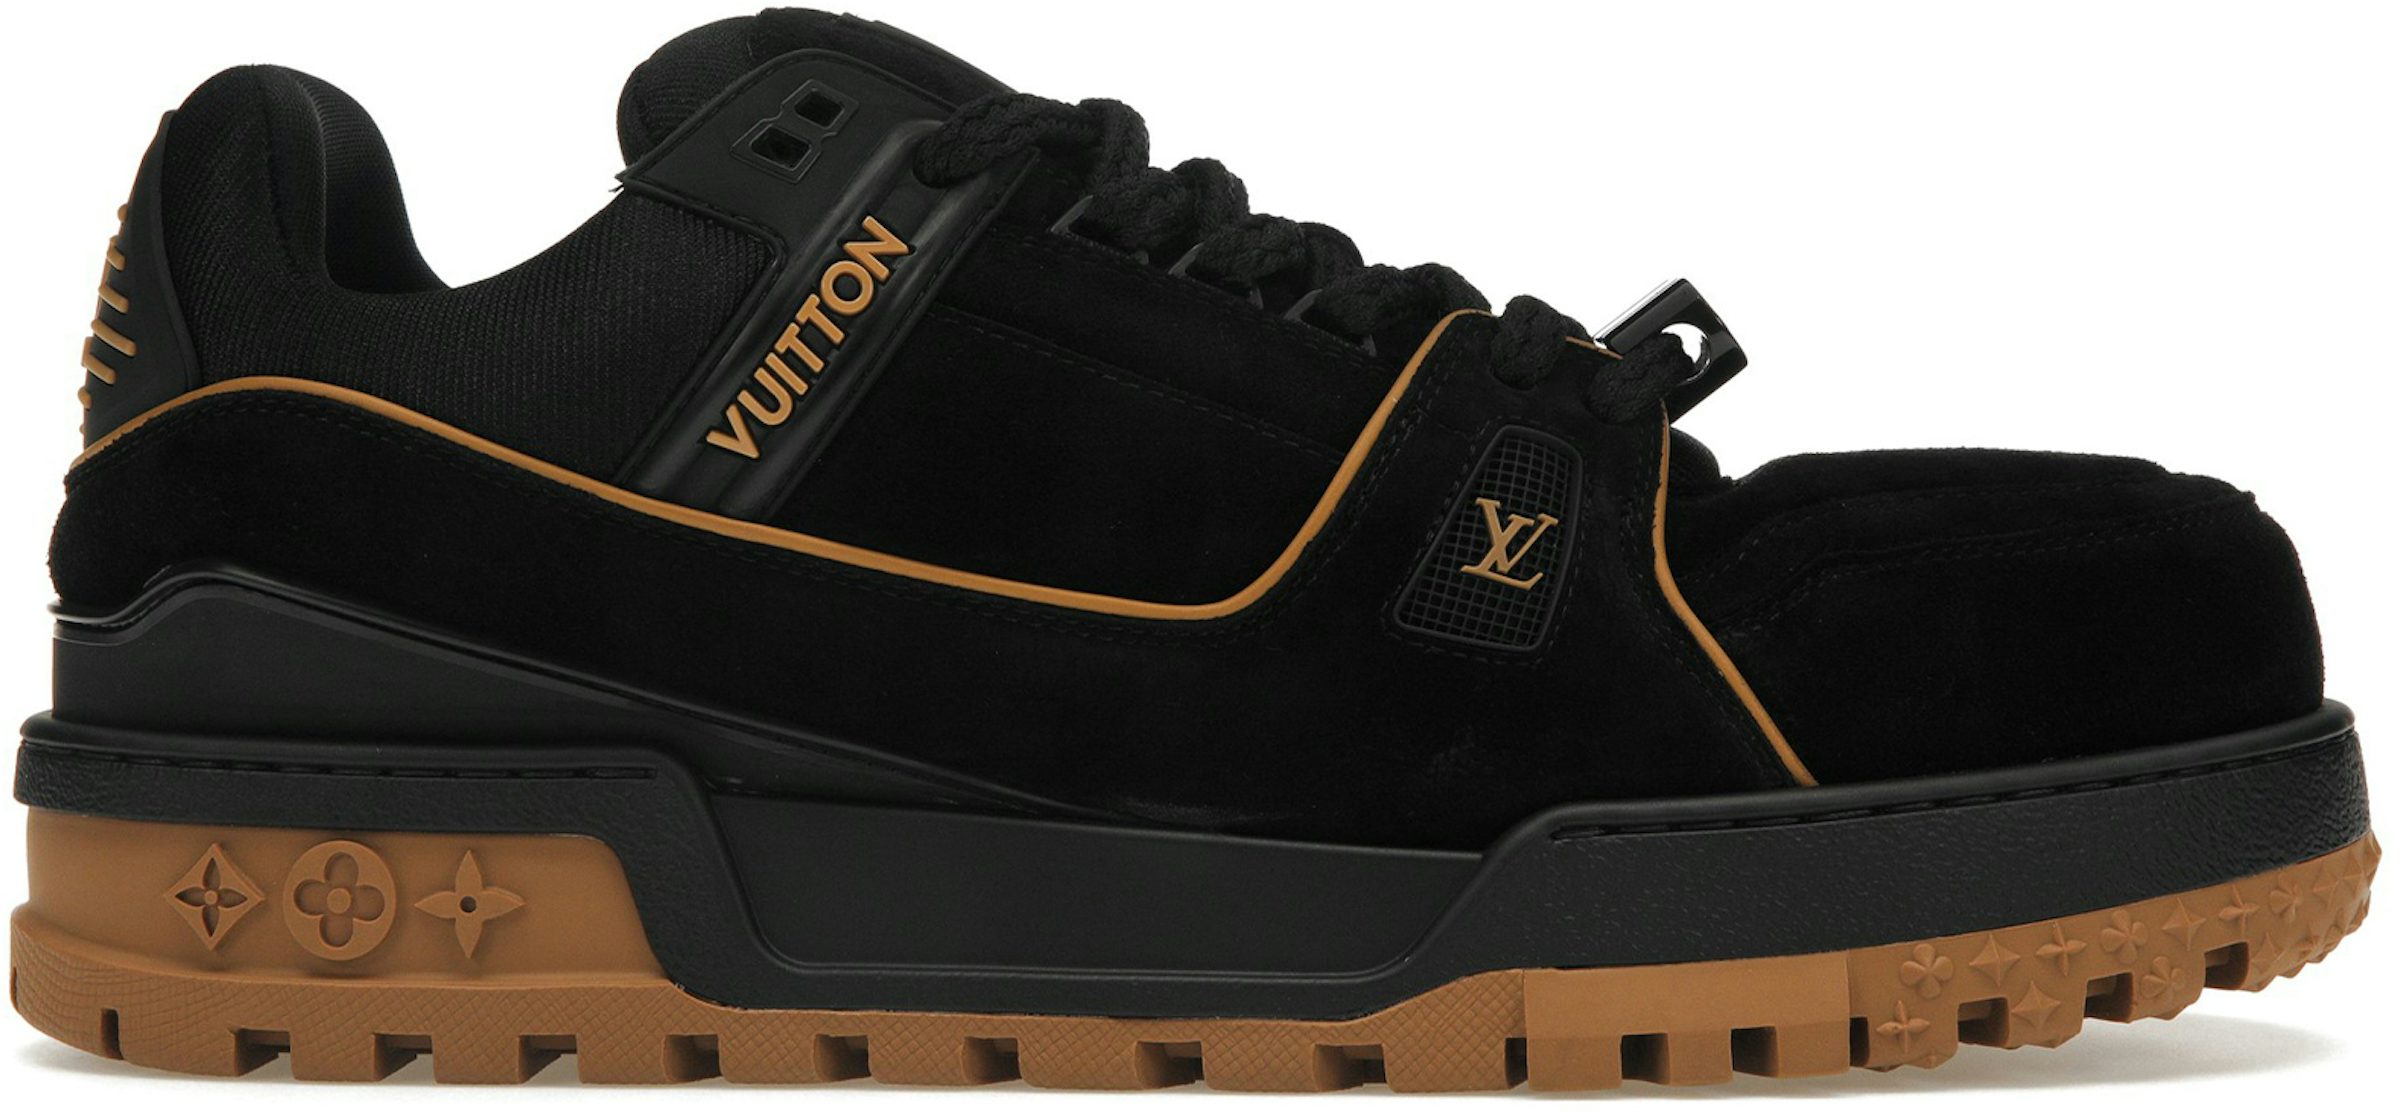 Buy Louis Vuitton Size 5.5 Shoes & New Sneakers - StockX